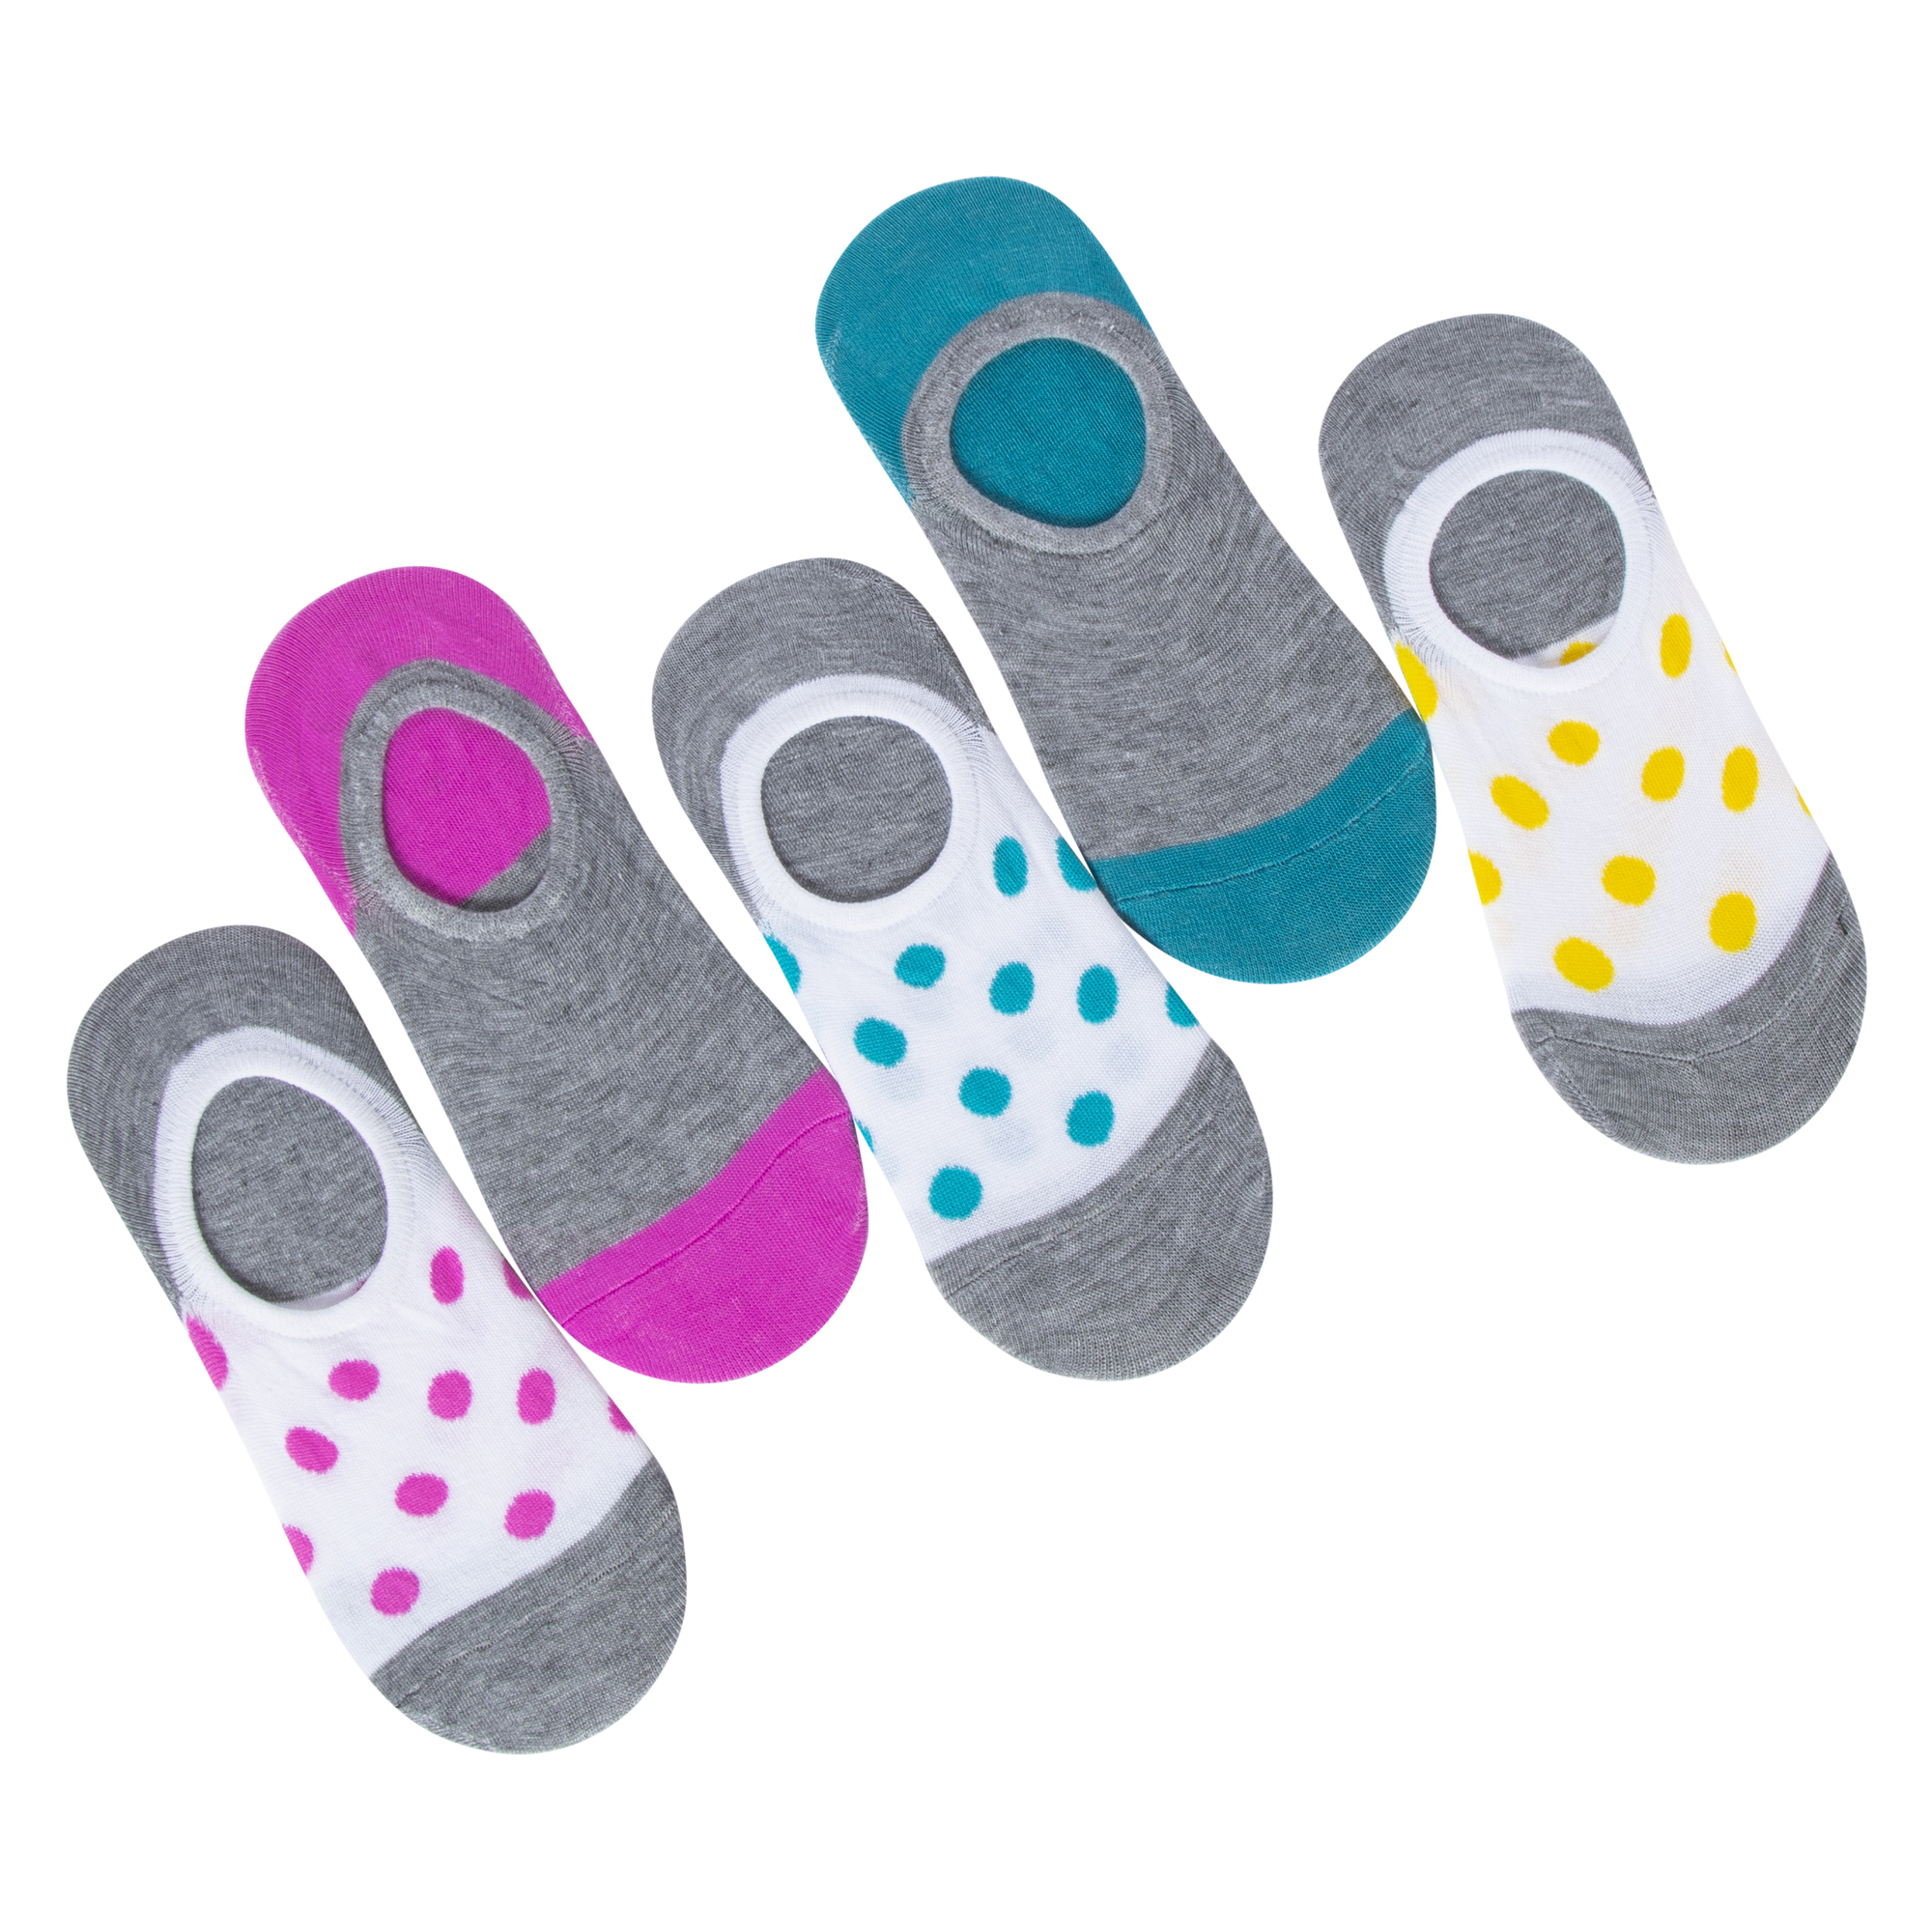 ladies no-show socks, dots & solids 5-pack